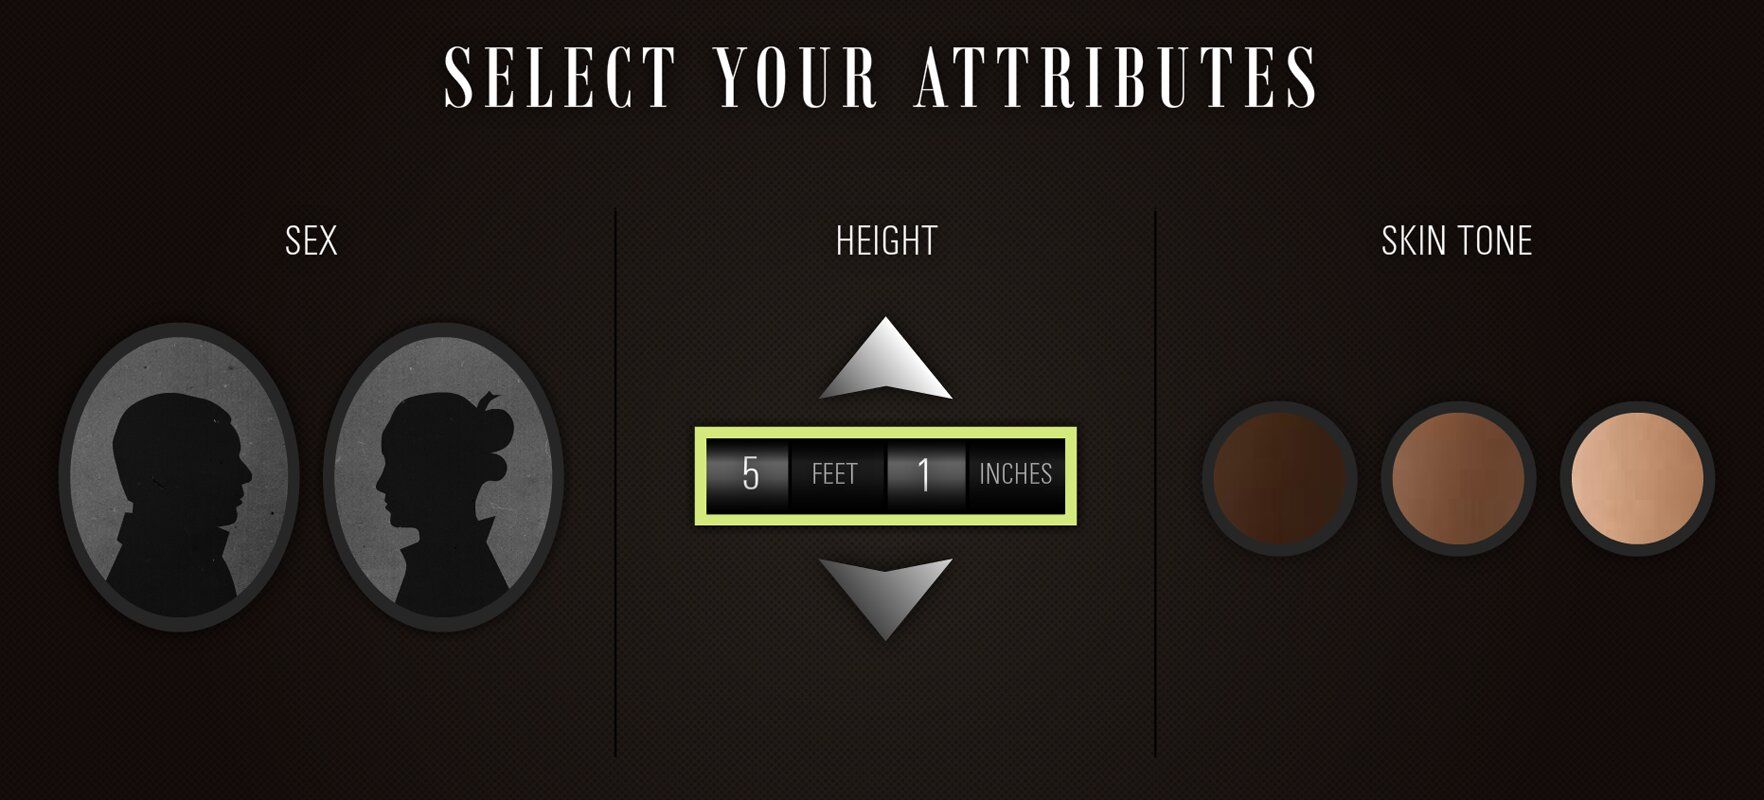 A "Select your attributes" screen.